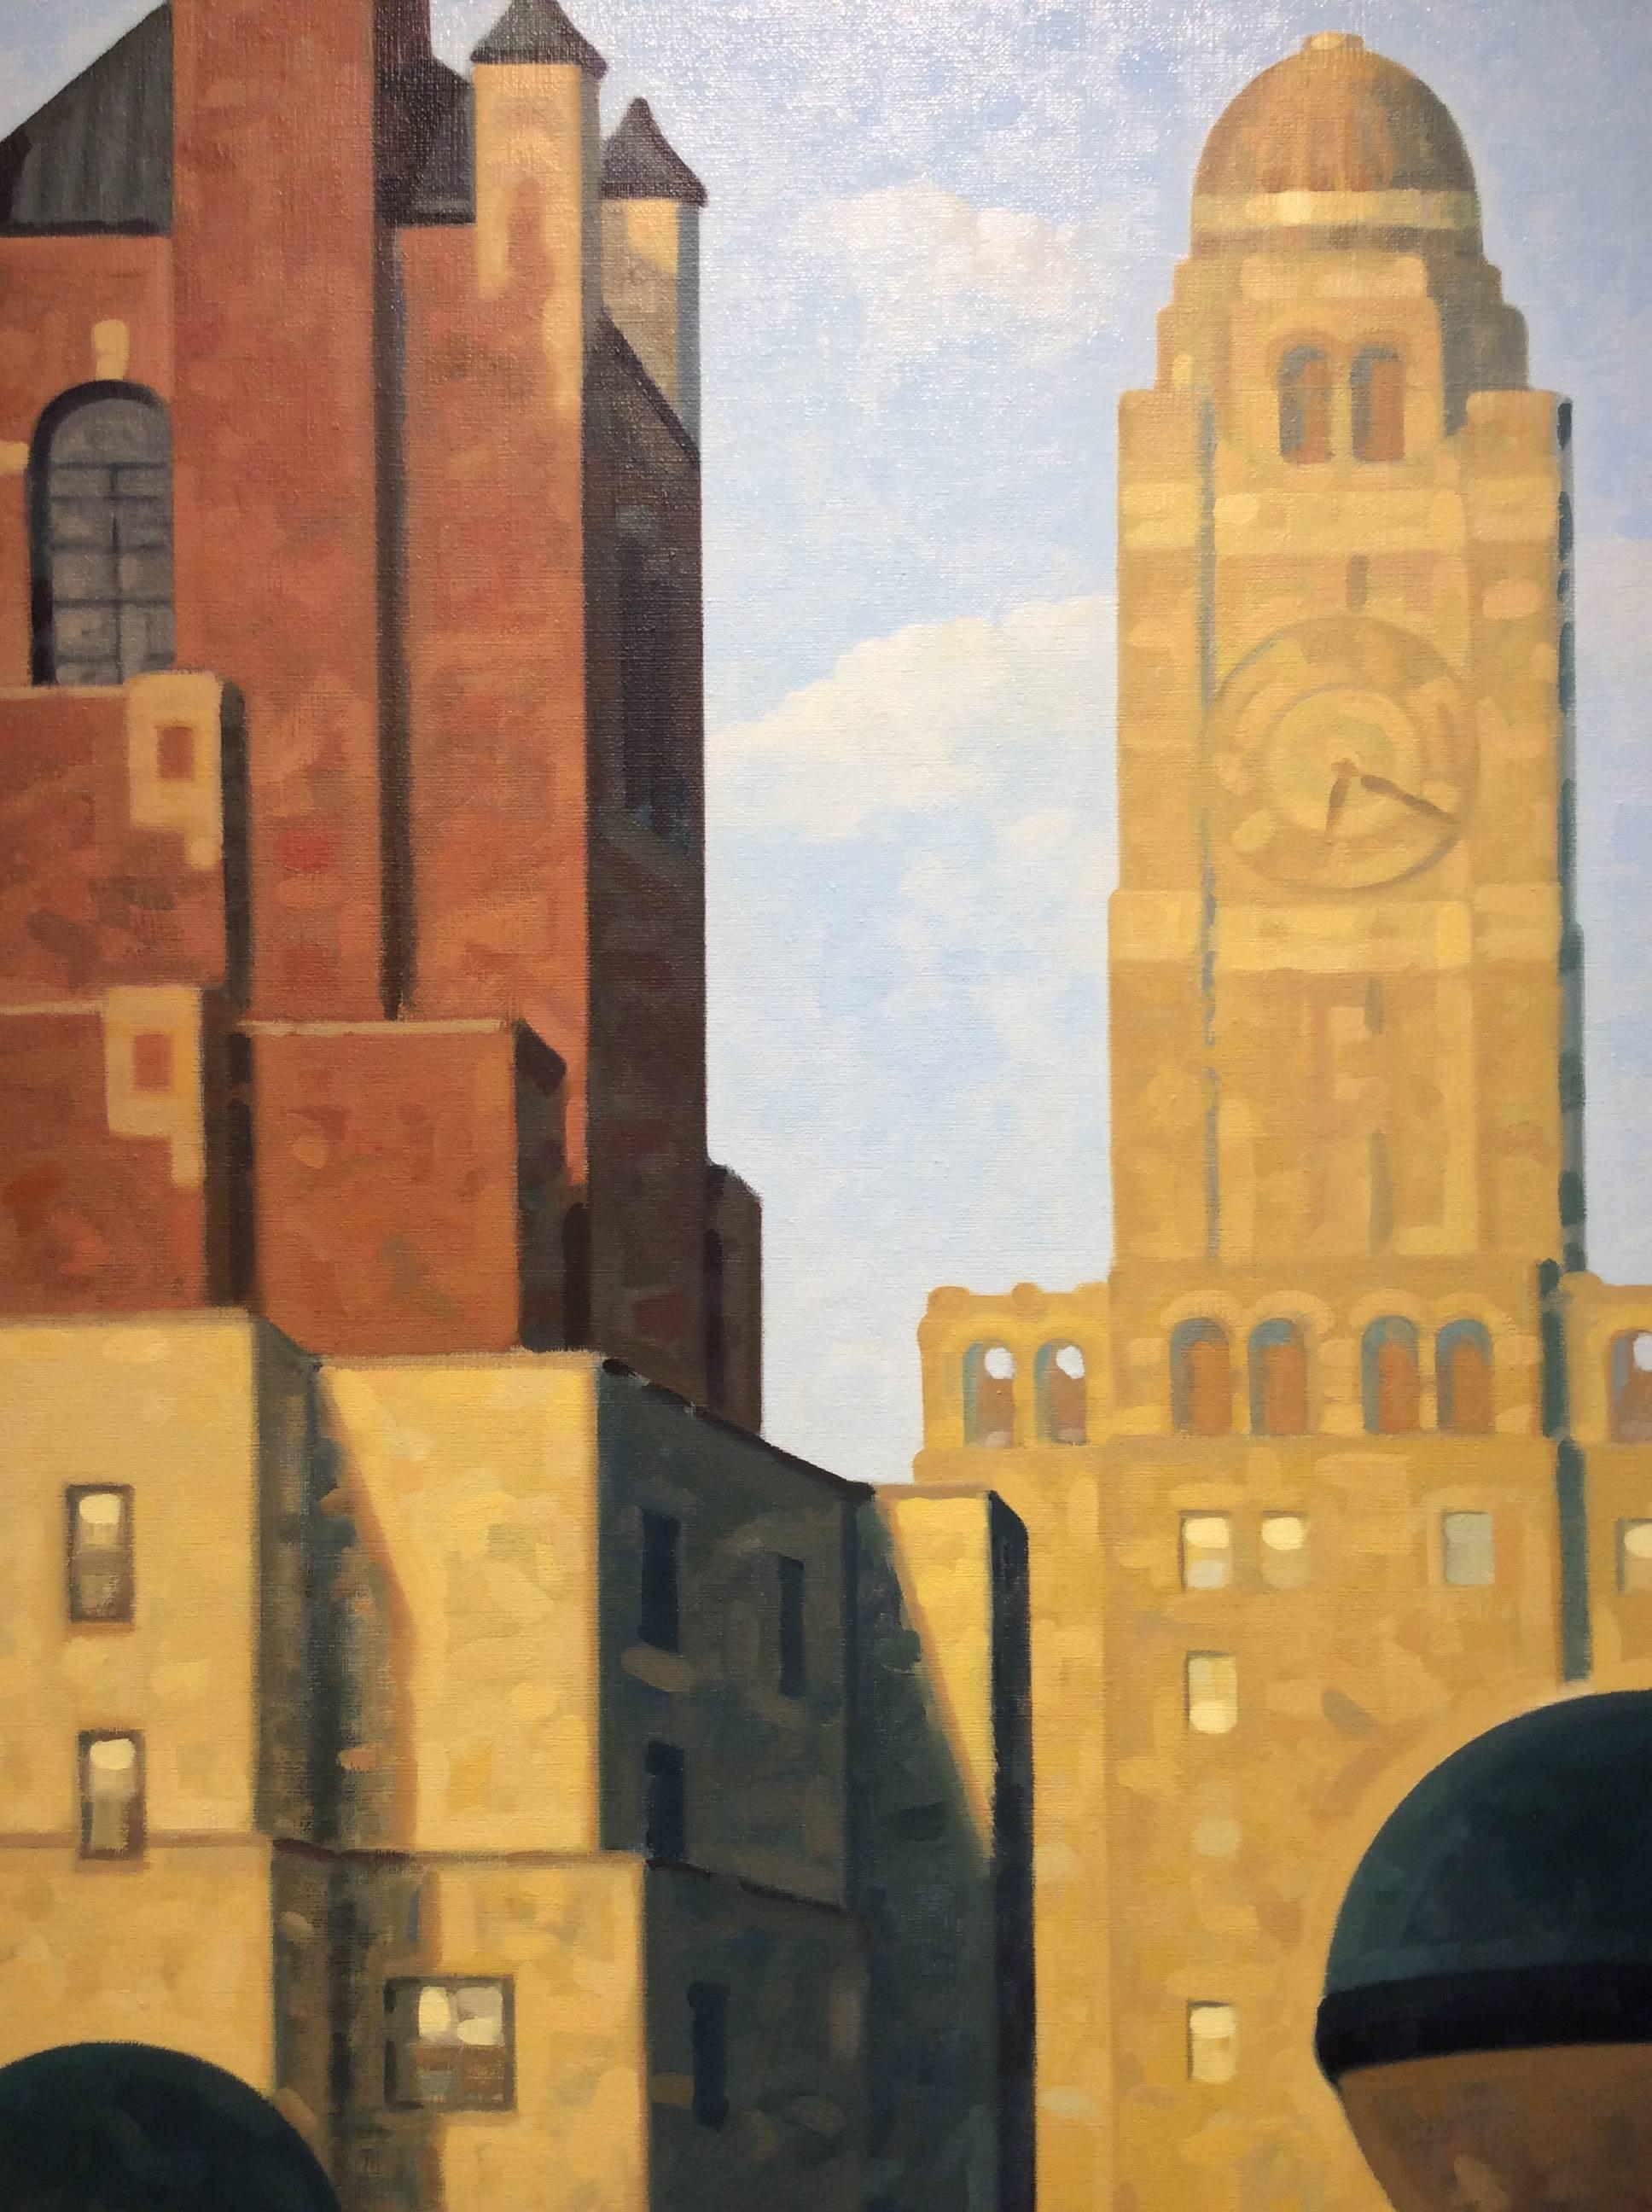 Oil on linen
40 x 30 inches unframed
43 x 33 inches framed 

This large vertical cityscape oil painting on linen in a black frame was painted by Robert Goldstrom in 2016. The scene predominately displays the Williamsburg Saving Bank Tower, an